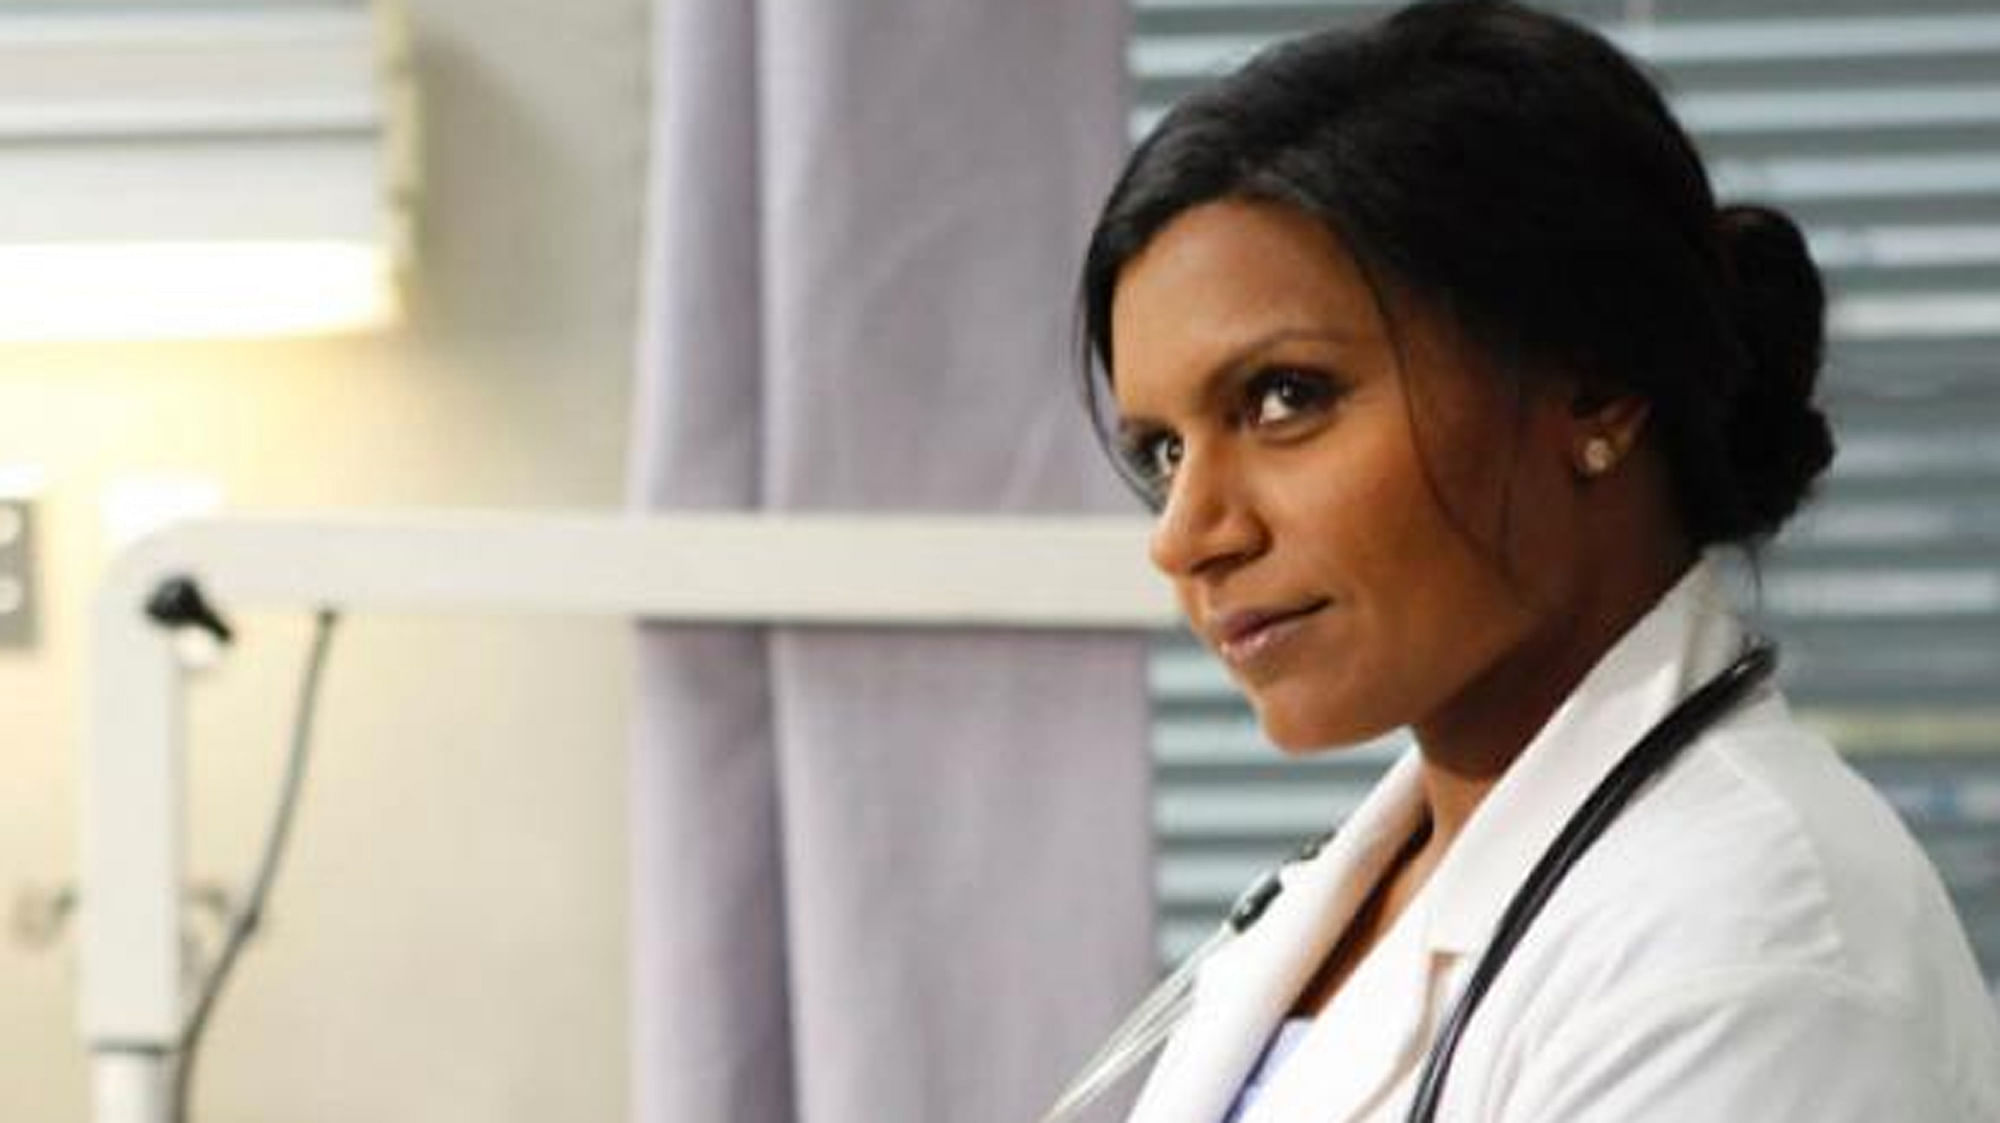 There are so many deliciously evil ways you can make money as a gynaecologist. (Photo Courtesy: <a href="https://www.facebook.com/TheMindyProject/photos_stream">Facebook/The Mindy Project</a>)